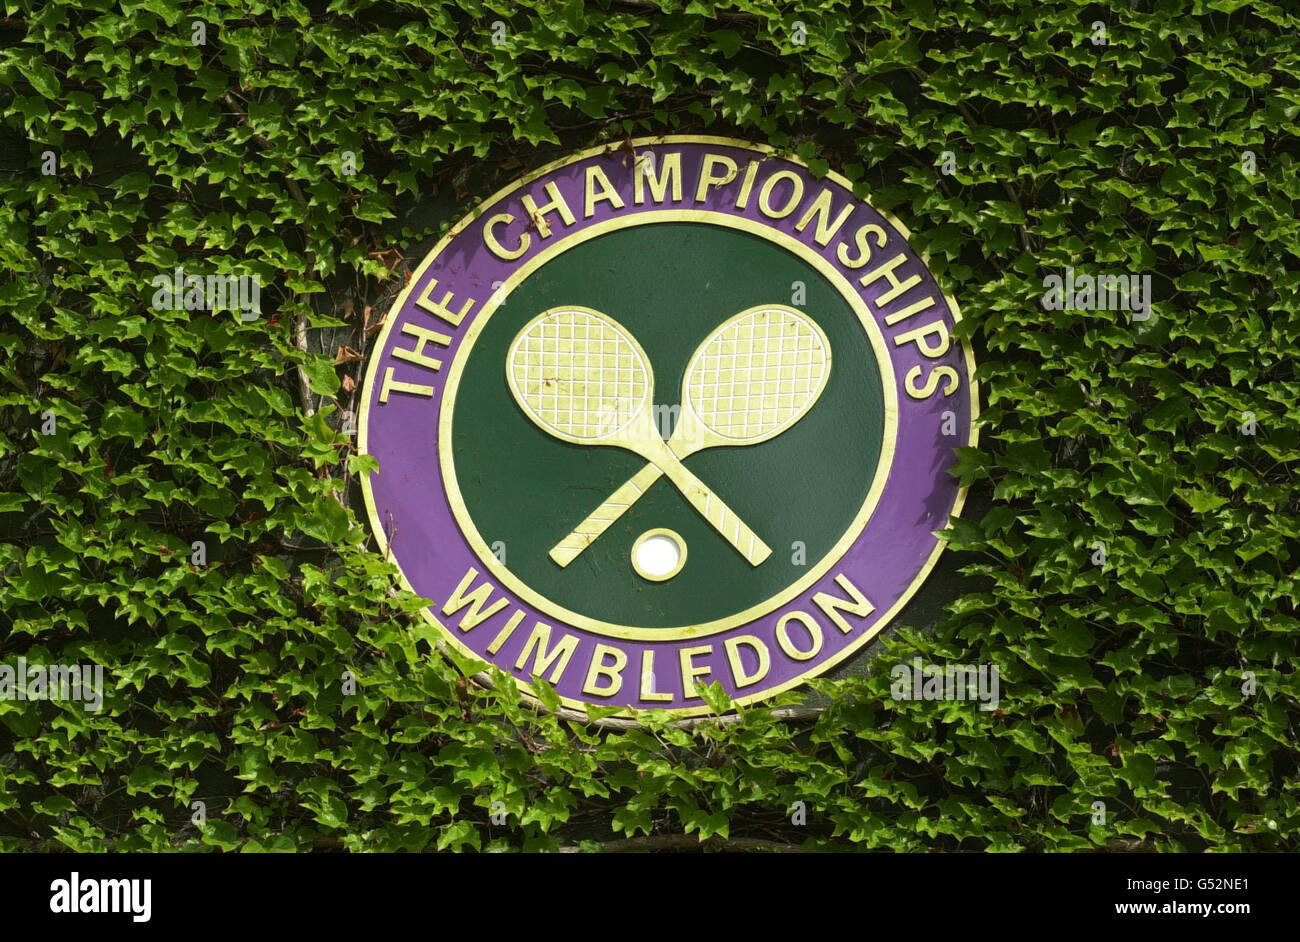 NO COMMERCIAL USE: The Wimbledon Tennis Championships logo Stock Photo ...